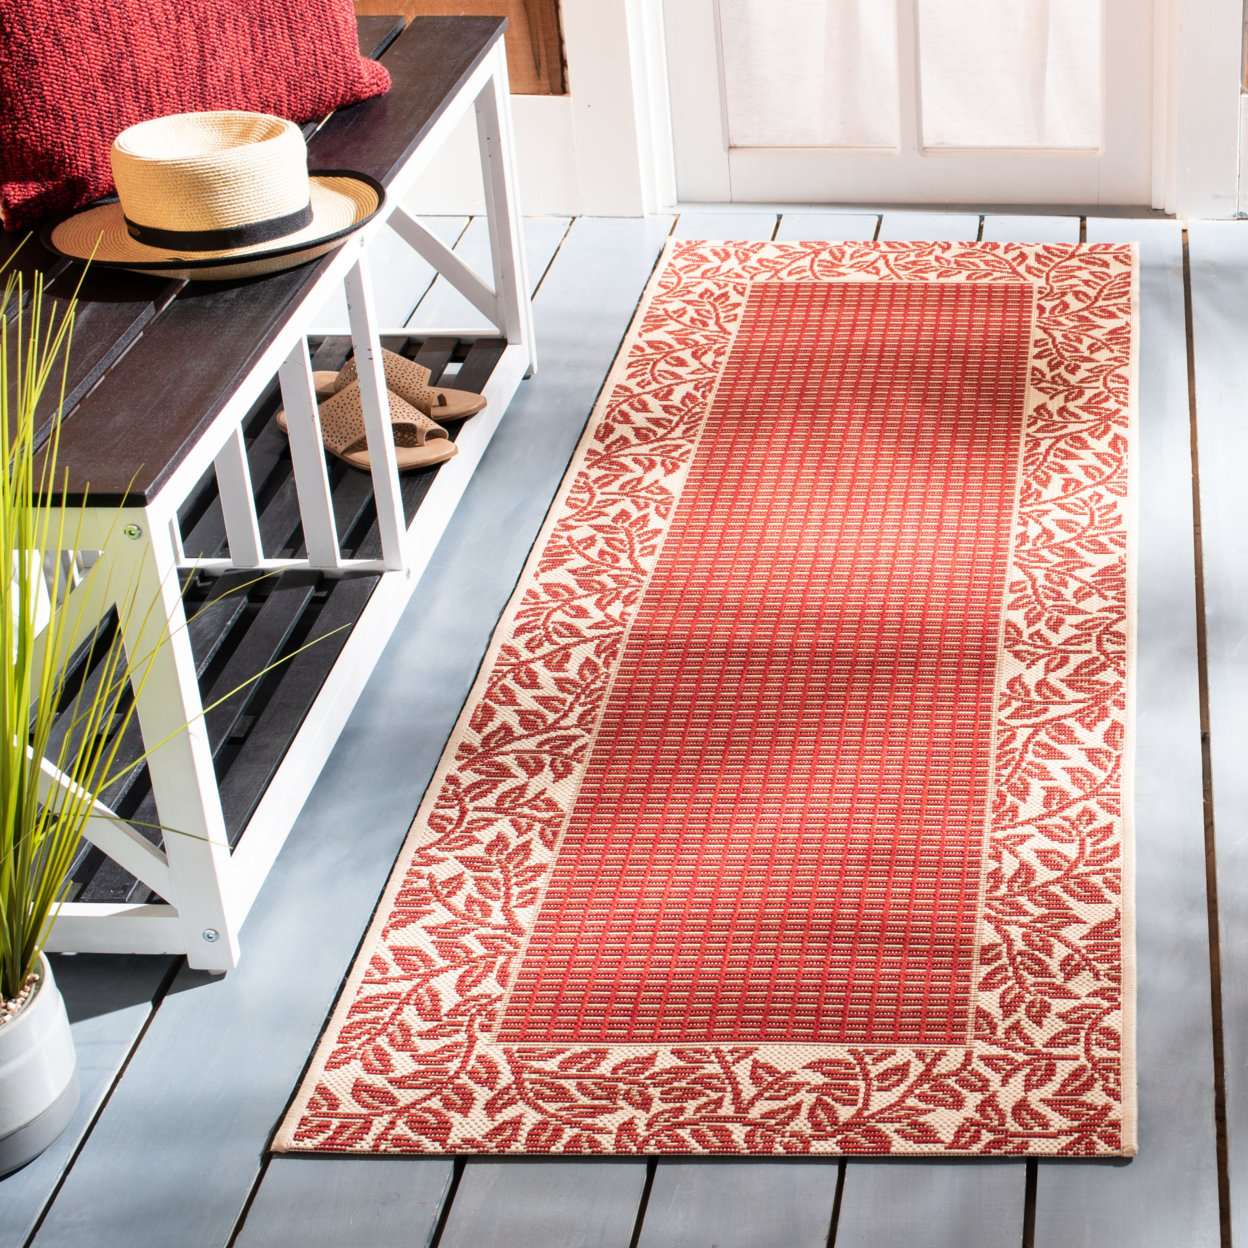 SAFAVIEH Courtyard CY0727-3707 Red / Natural Rug - 8' X 11'